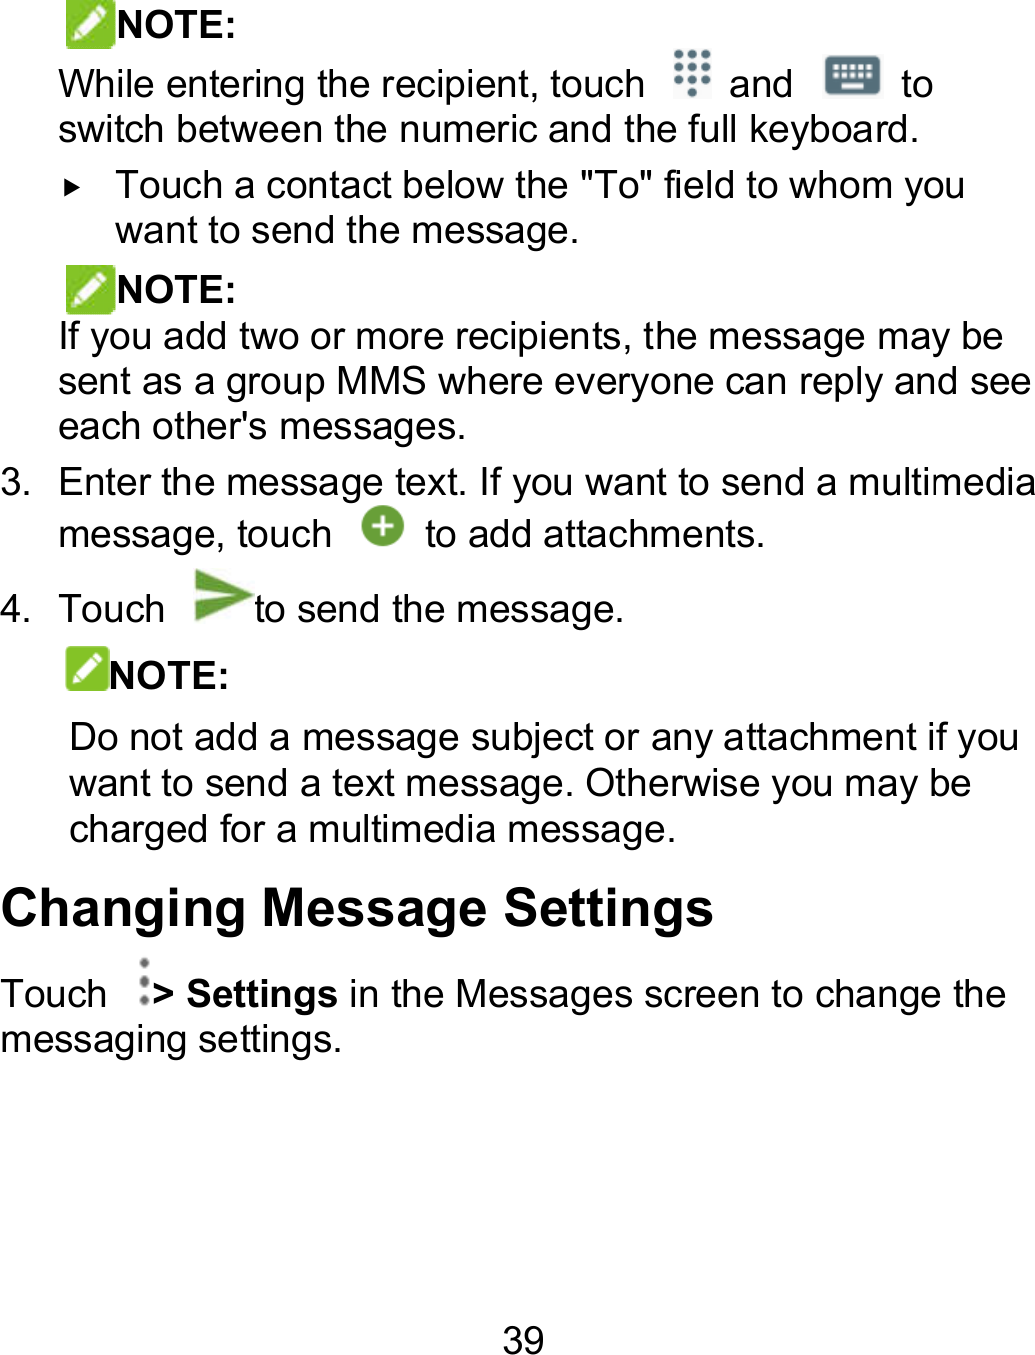 39 NOTE: While entering the recipient, touch    and   to switch between the numeric and the full keyboard.  Touch a contact below the &quot;To&quot; field to whom you want to send the message.   NOTE:   If you add two or more recipients, the message may be sent as a group MMS where everyone can reply and see each other&apos;s messages. 3. Enter the message text. If you want to send a multimedia message, touch    to add attachments. 4.  Touch  to send the message. NOTE: Do not add a message subject or any attachment if you want to send a text message. Otherwise you may be charged for a multimedia message. Changing Message Settings Touch  &gt; Settings in the Messages screen to change the messaging settings. to switch between the numeric and the full keyboard.  Touch a contact below the &quot;To&quot; field to whom you If you add two or more recipients, the message may be sent as a group MMS where everyone can reply and see Enter the message text. If you want to send a multimedia Do not add a message subject or any attachment if you want to send a text message. Otherwise you may be in the Messages screen to change the 